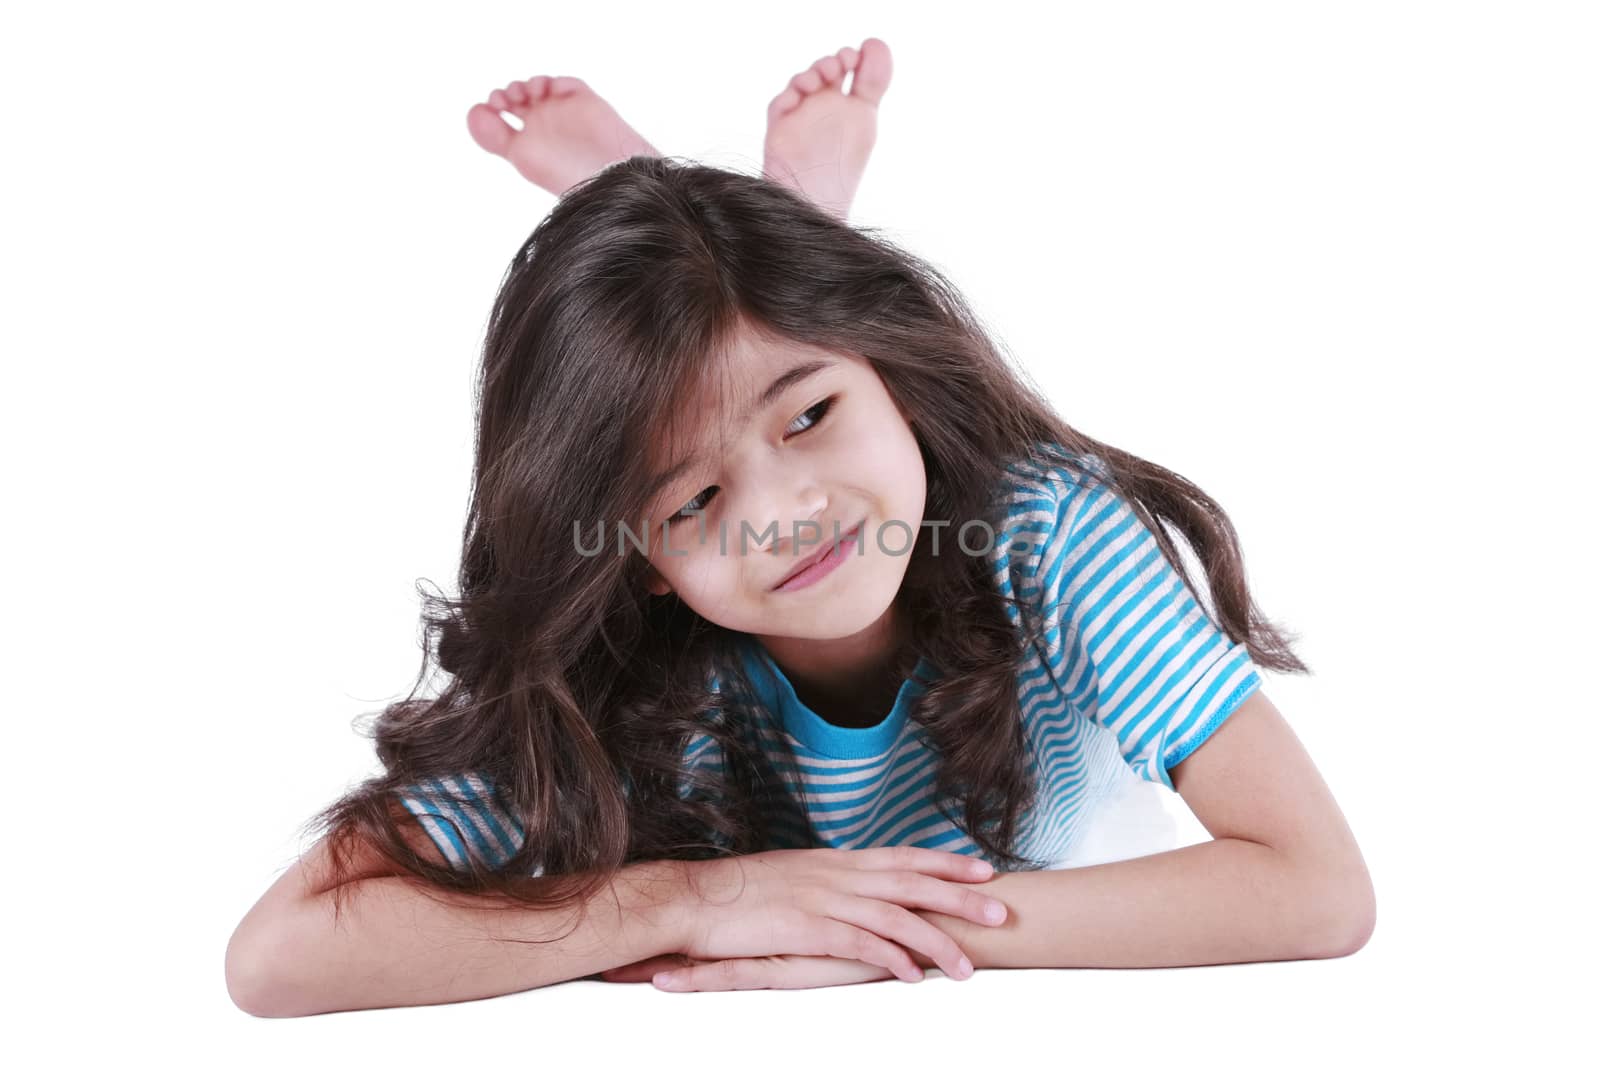 Seven year old girl lying down on floor, smiling by jarenwicklund